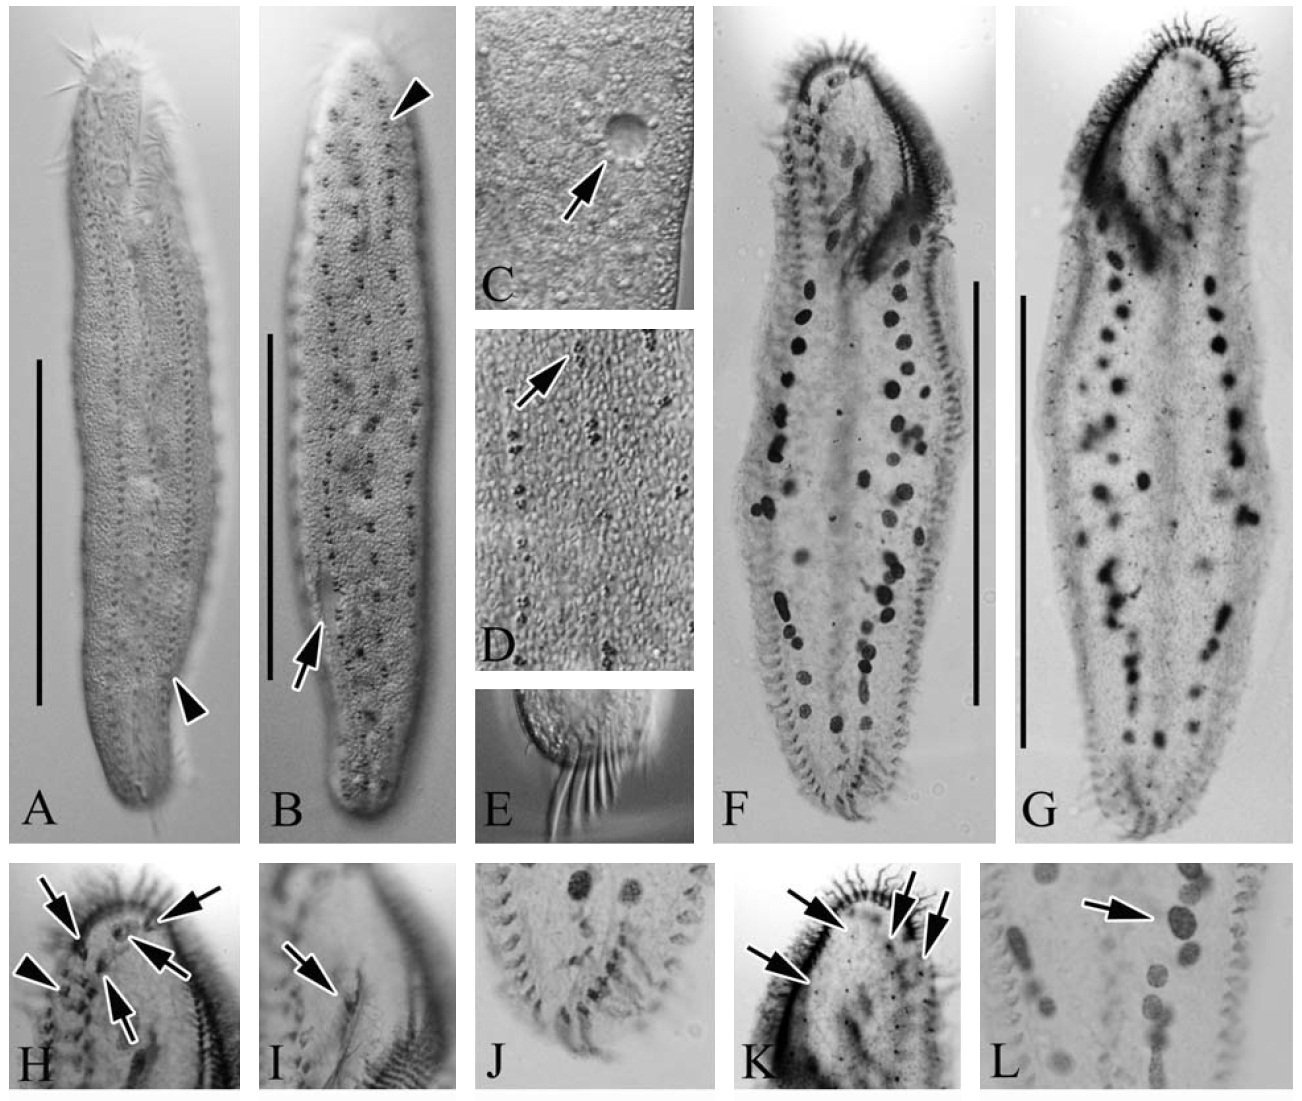 Micrographs of Anteholosticha pulchra from live (A-E) and protargol impregnated (F-L) specimens. A B Live ventral (A) anddorsal (B) view arrangement of cortical granules (arrowhead); C Ventral view contractile vacuole (arrow); D Dorsal view reddishcortical granules (arrow); E Live ventral view of transverse cirri; F G Dorsal and ventral views of protargol-impregnated specimen; H Ventral view the frontal (arrows) and frontoterminal (arrowhead) cirri; I Buccal cirri (arrow); J Ventral view the transversecirri; K Dorsal view the dorsal kineties typically four; L Macronuclear nodules (arrow). Scale bars: A B F G=100 μm.